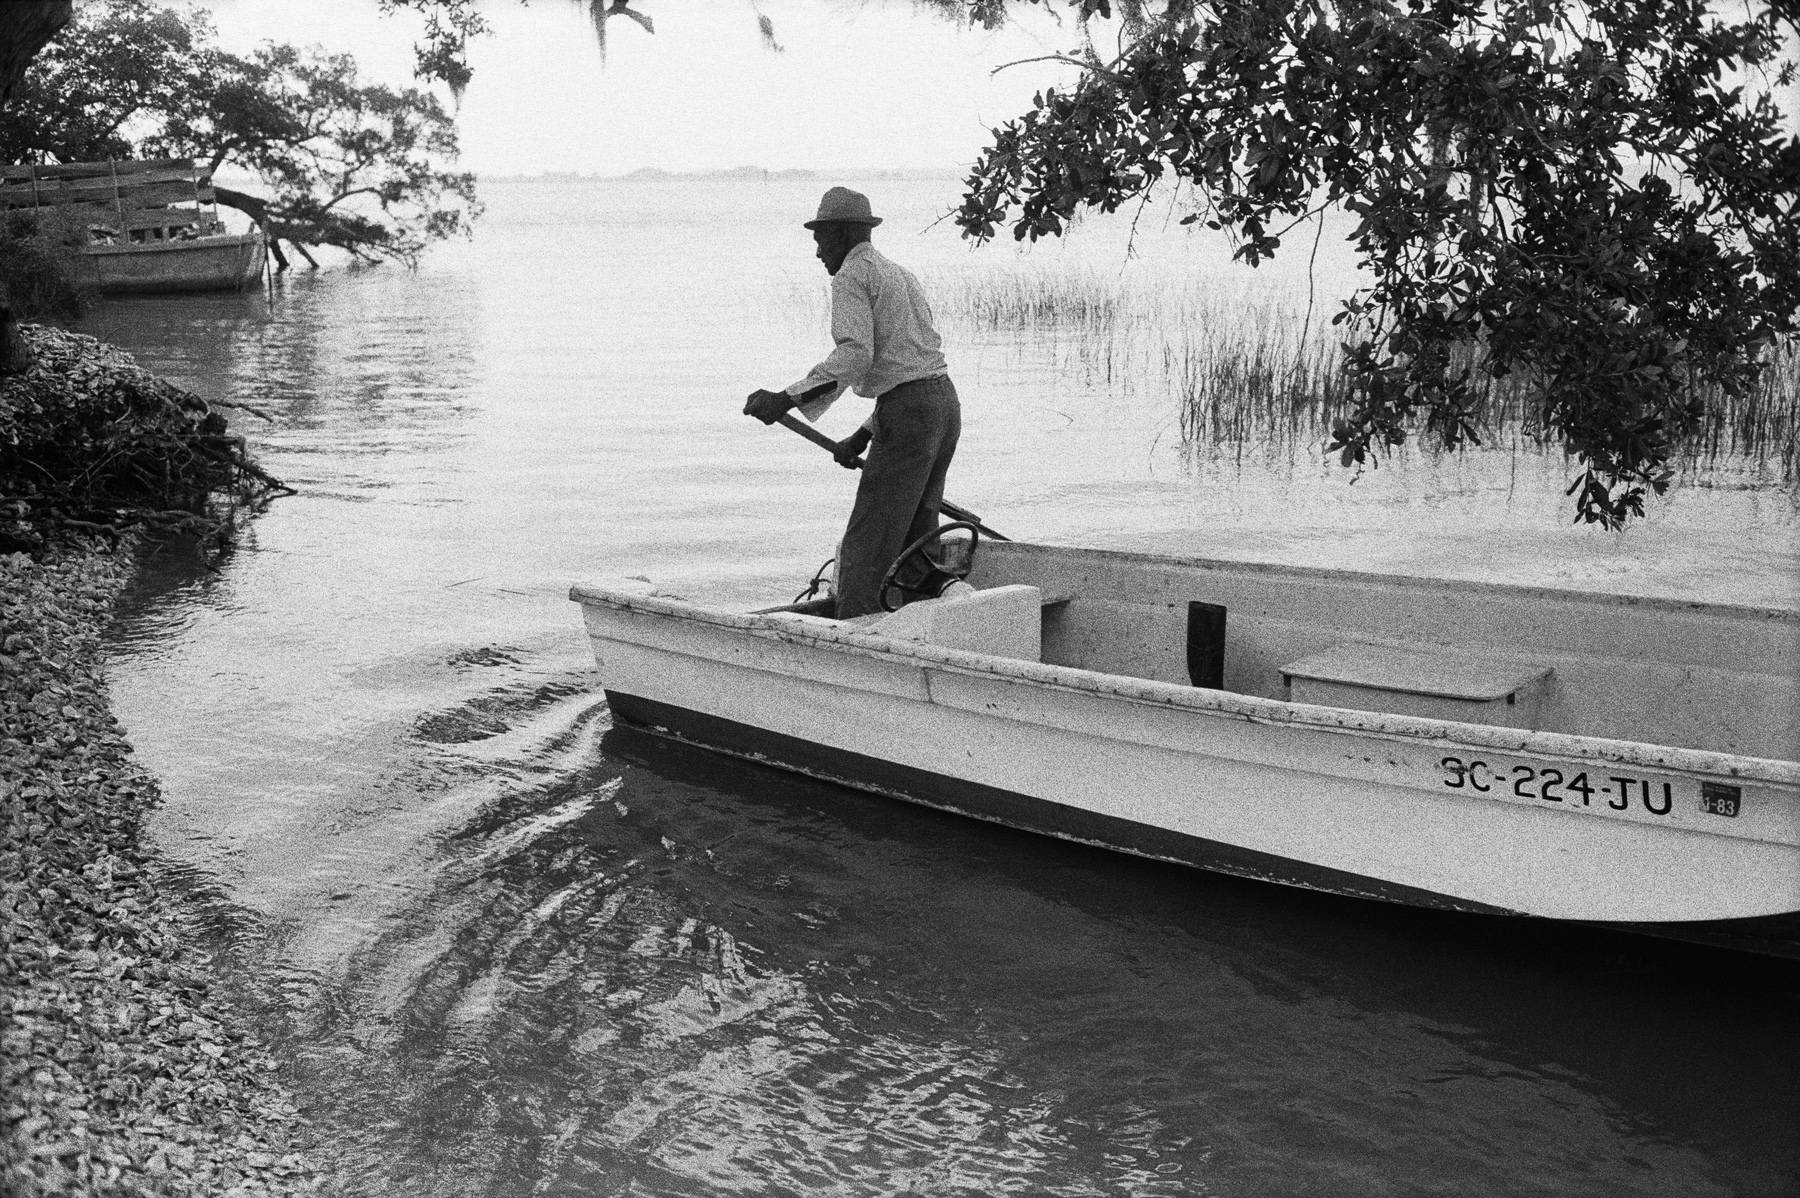 Jake and His Boat Arriving on Daufuskie's Shore,  c. 1978